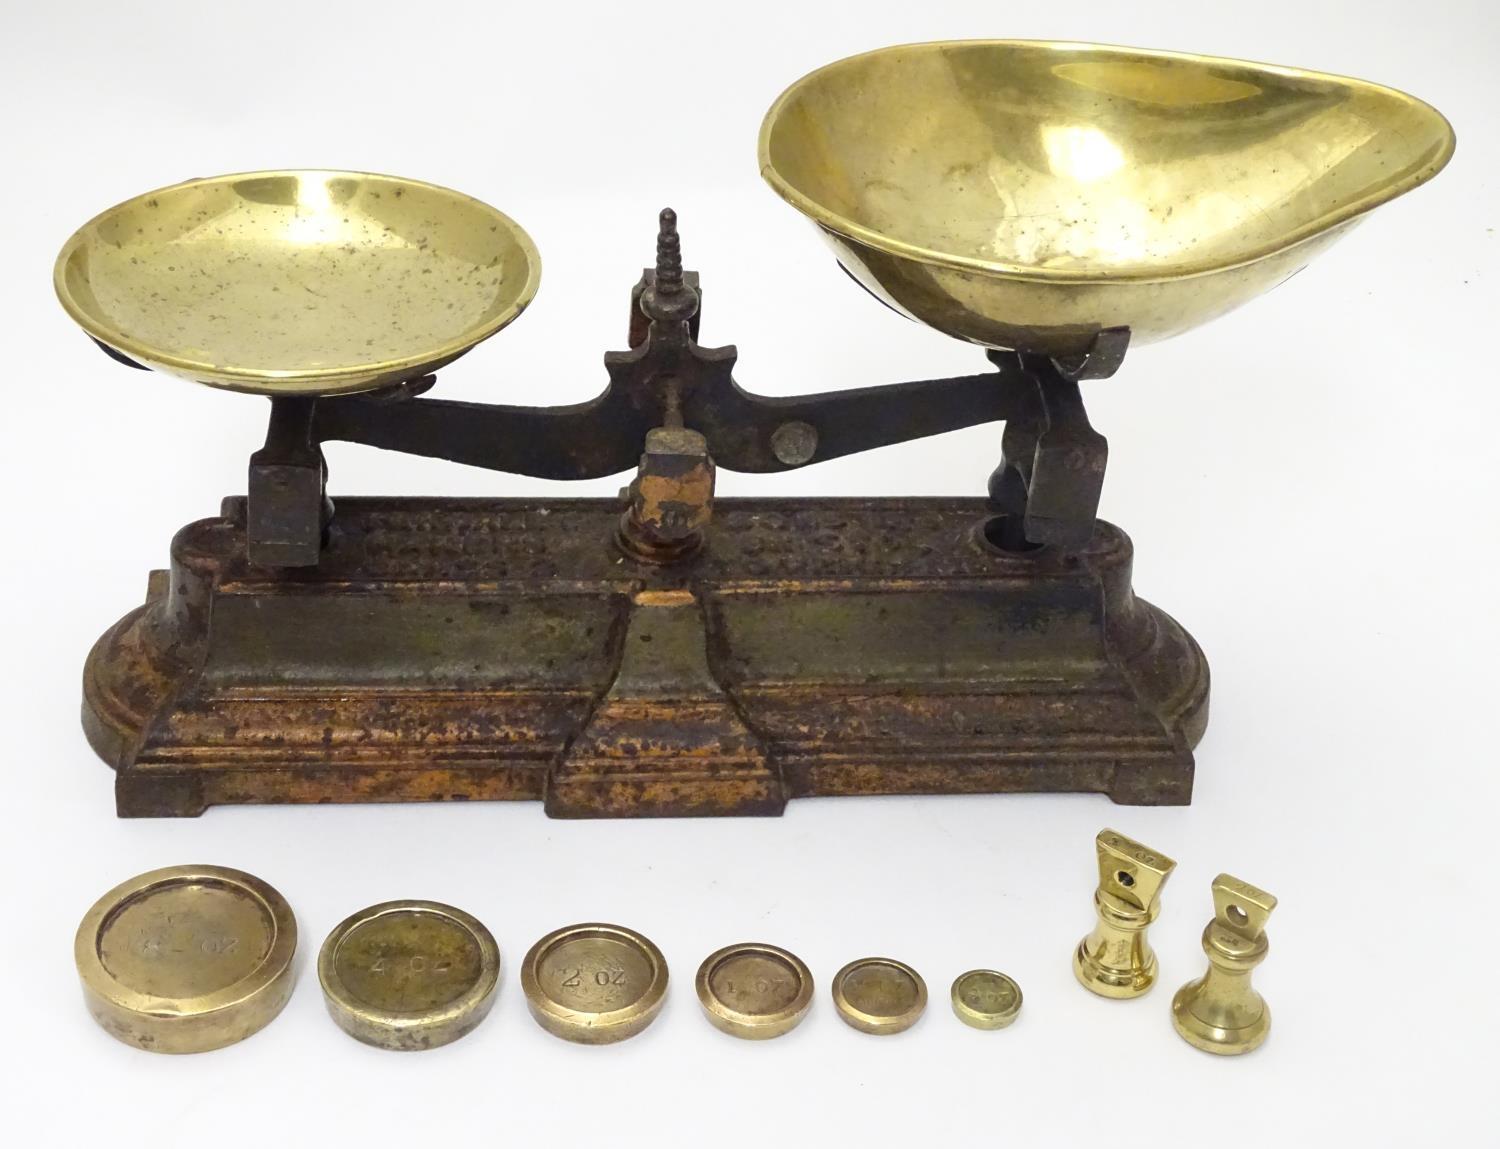 Shop balance scales by Parnall & Sons Ltd. with brass trays and associated weights. Please Note - we